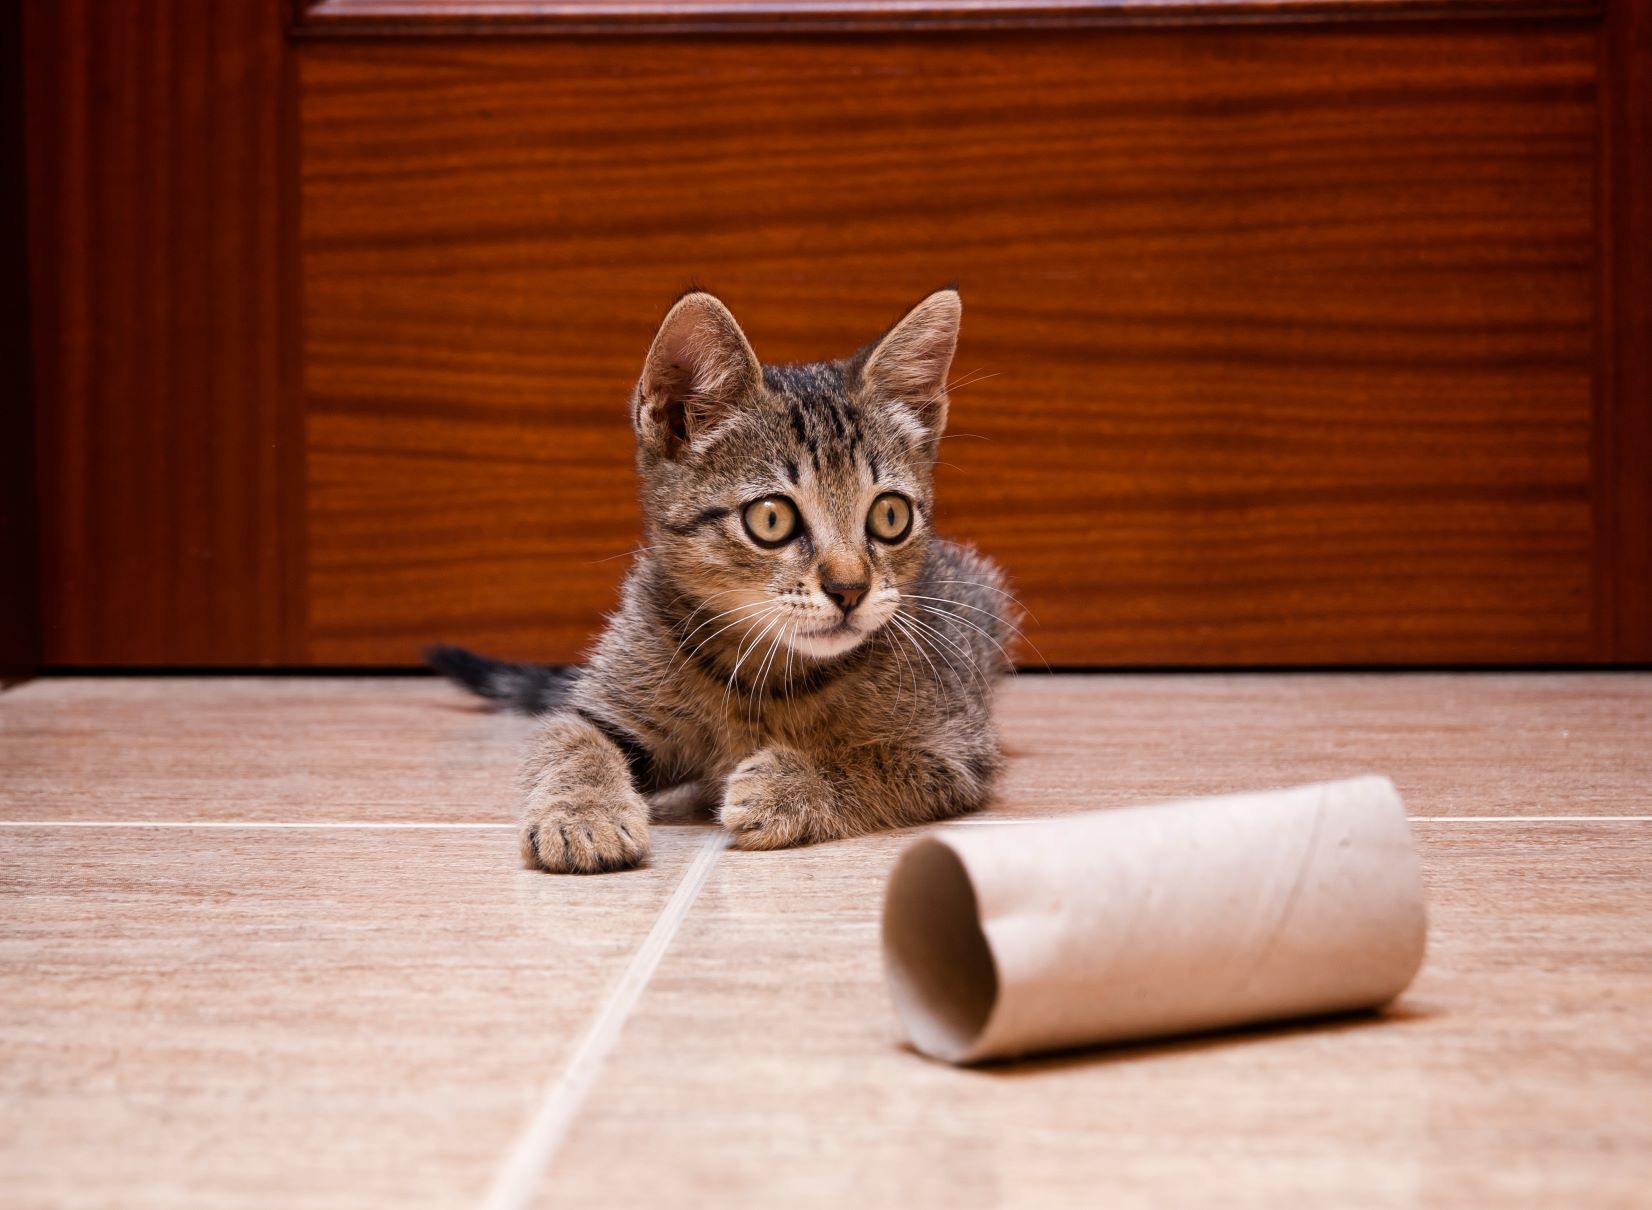 Cat playing with toilet roll cardboard